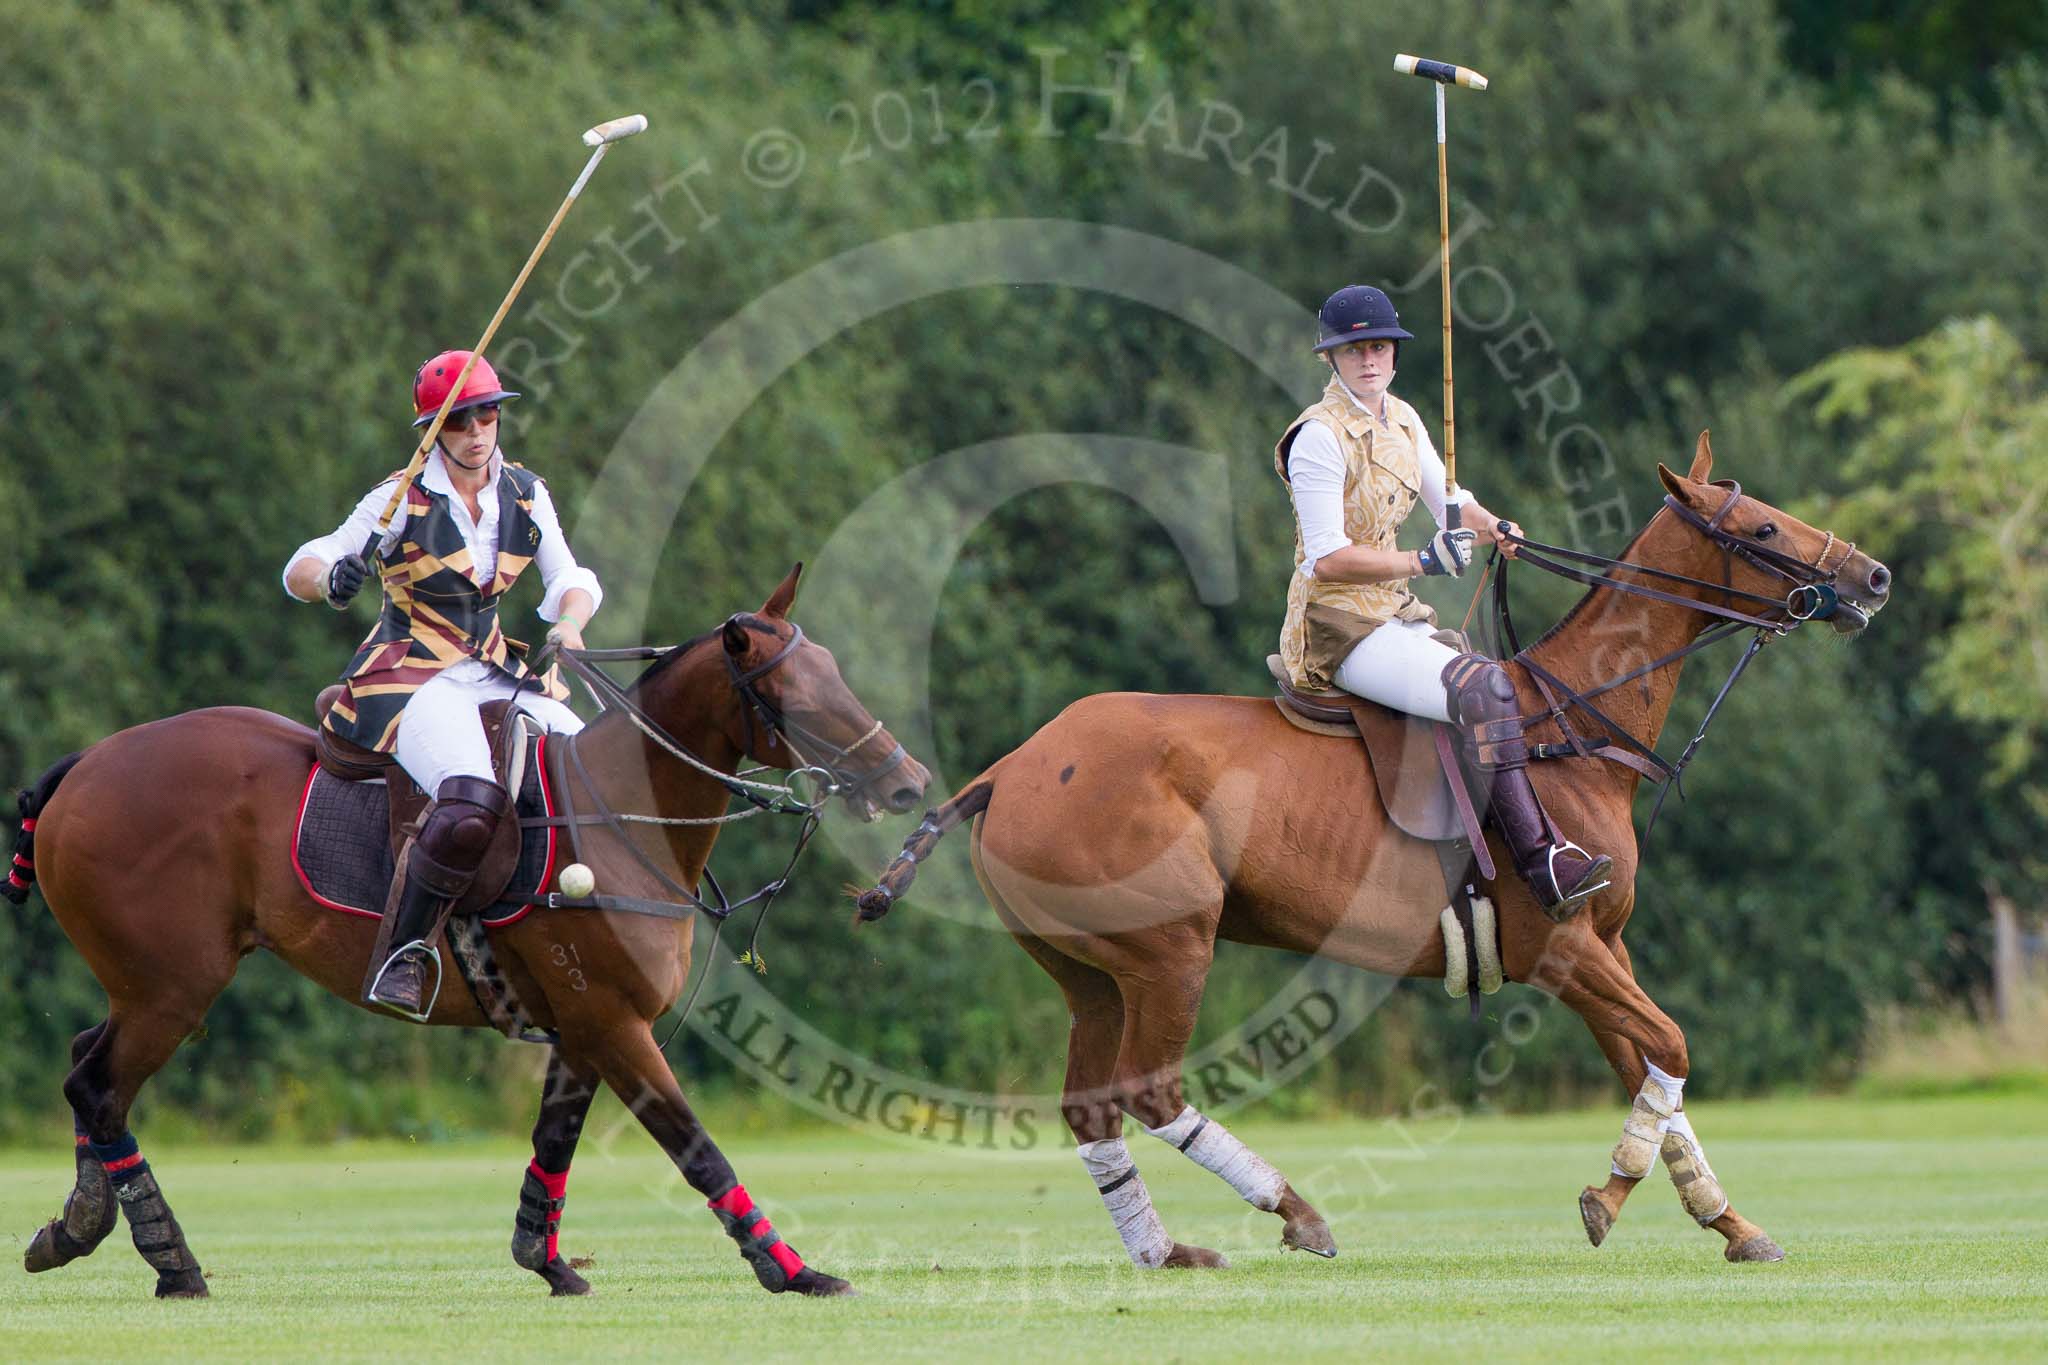 7th Heritage Polo Cup finals: Sarah Wisman turning on the ball - Sheena Robertson..
Hurtwood Park Polo Club,
Ewhurst Green,
Surrey,
United Kingdom,
on 05 August 2012 at 15:16, image #145